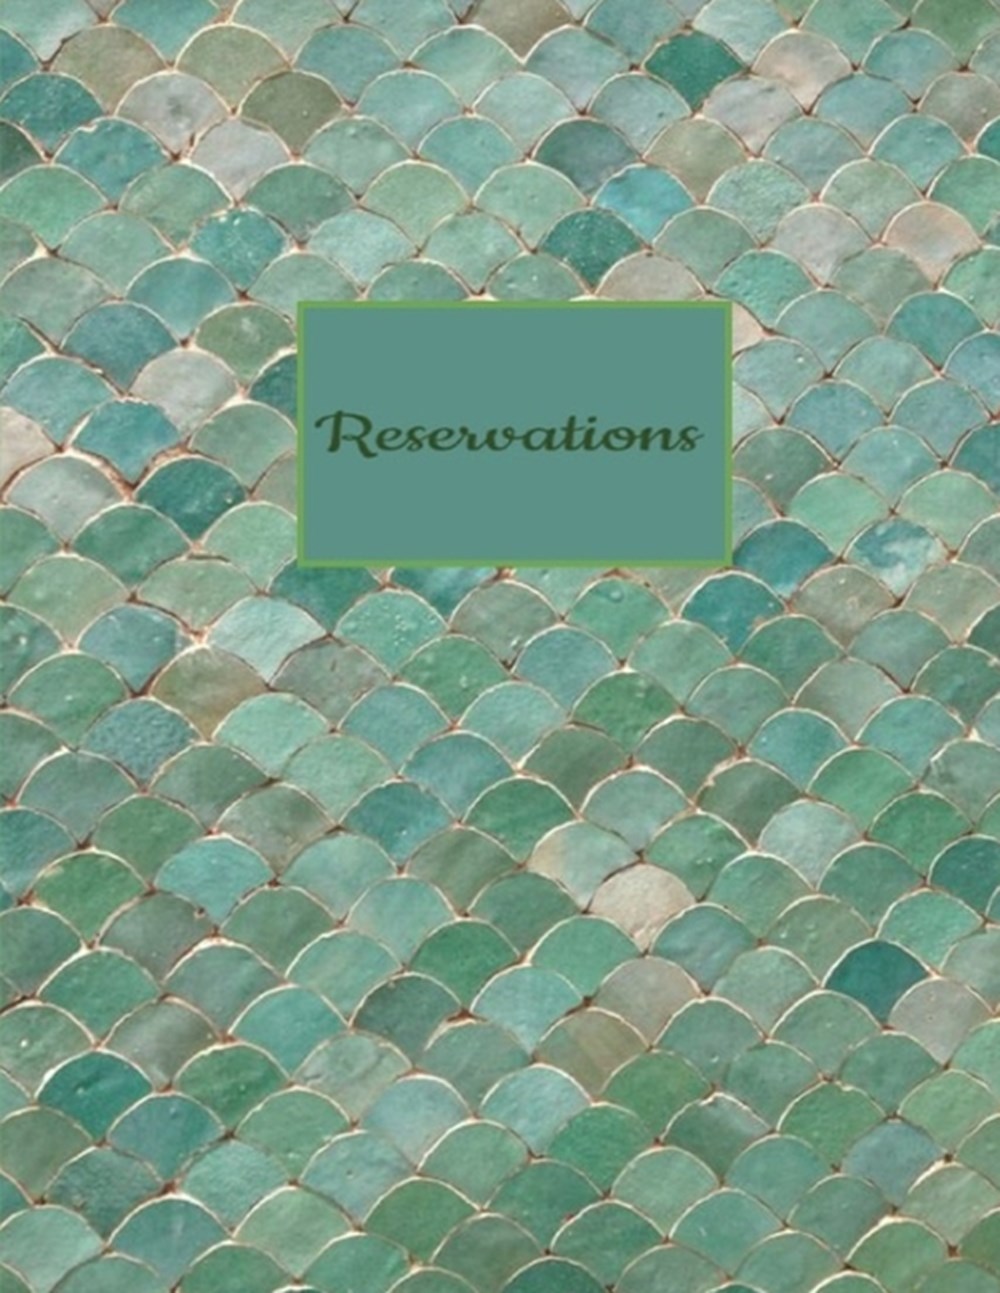 Reservations Black Faux Leather Reservation Book for Restaurant - 6 Months Guest Booking Diary - Hos